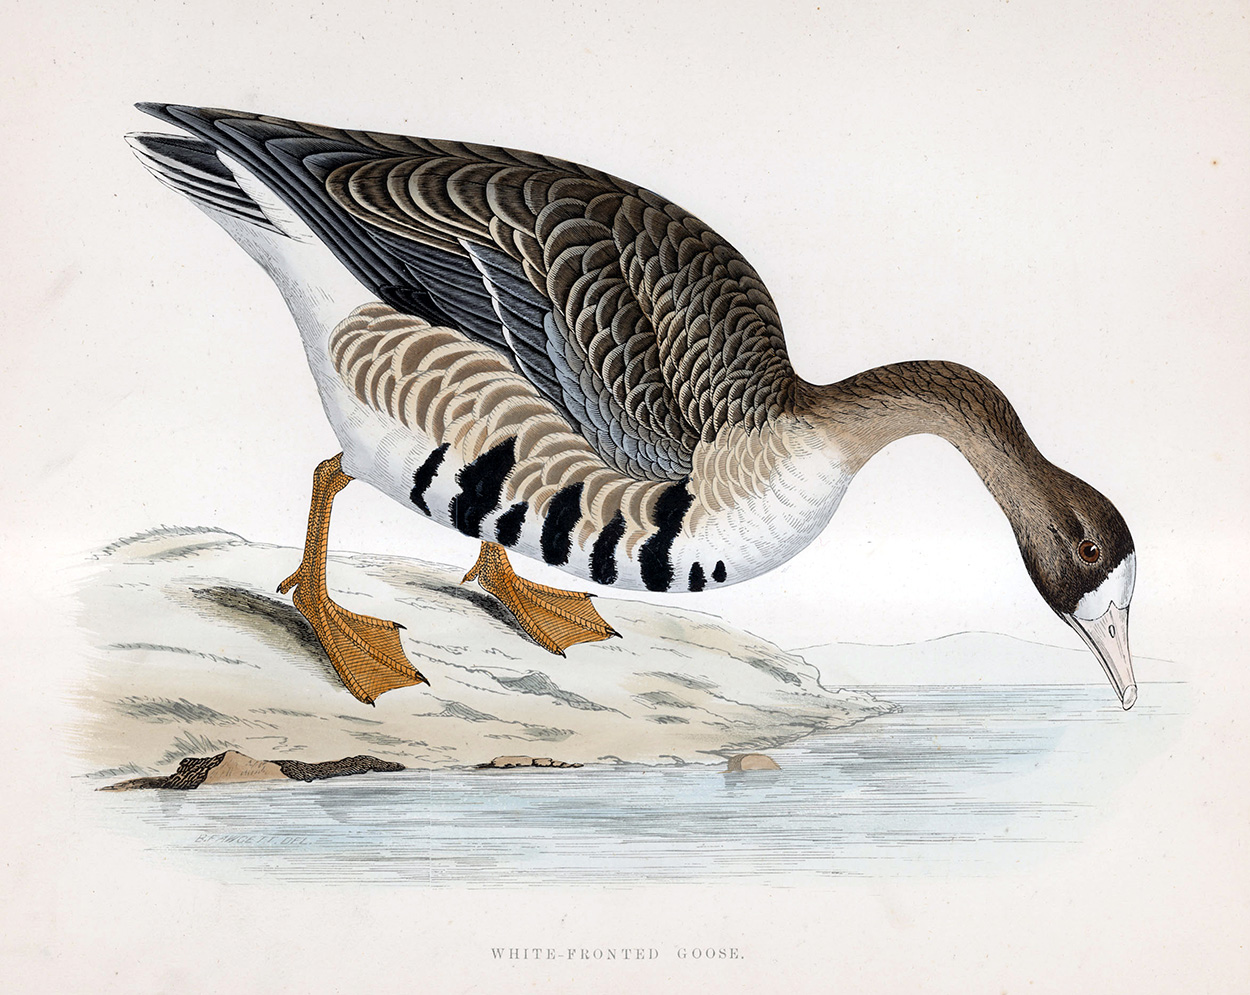 White Fronted Goose - hand coloured lithograph 1891 (Print) art by Beverley R Morris Art at The Illustration Art Gallery